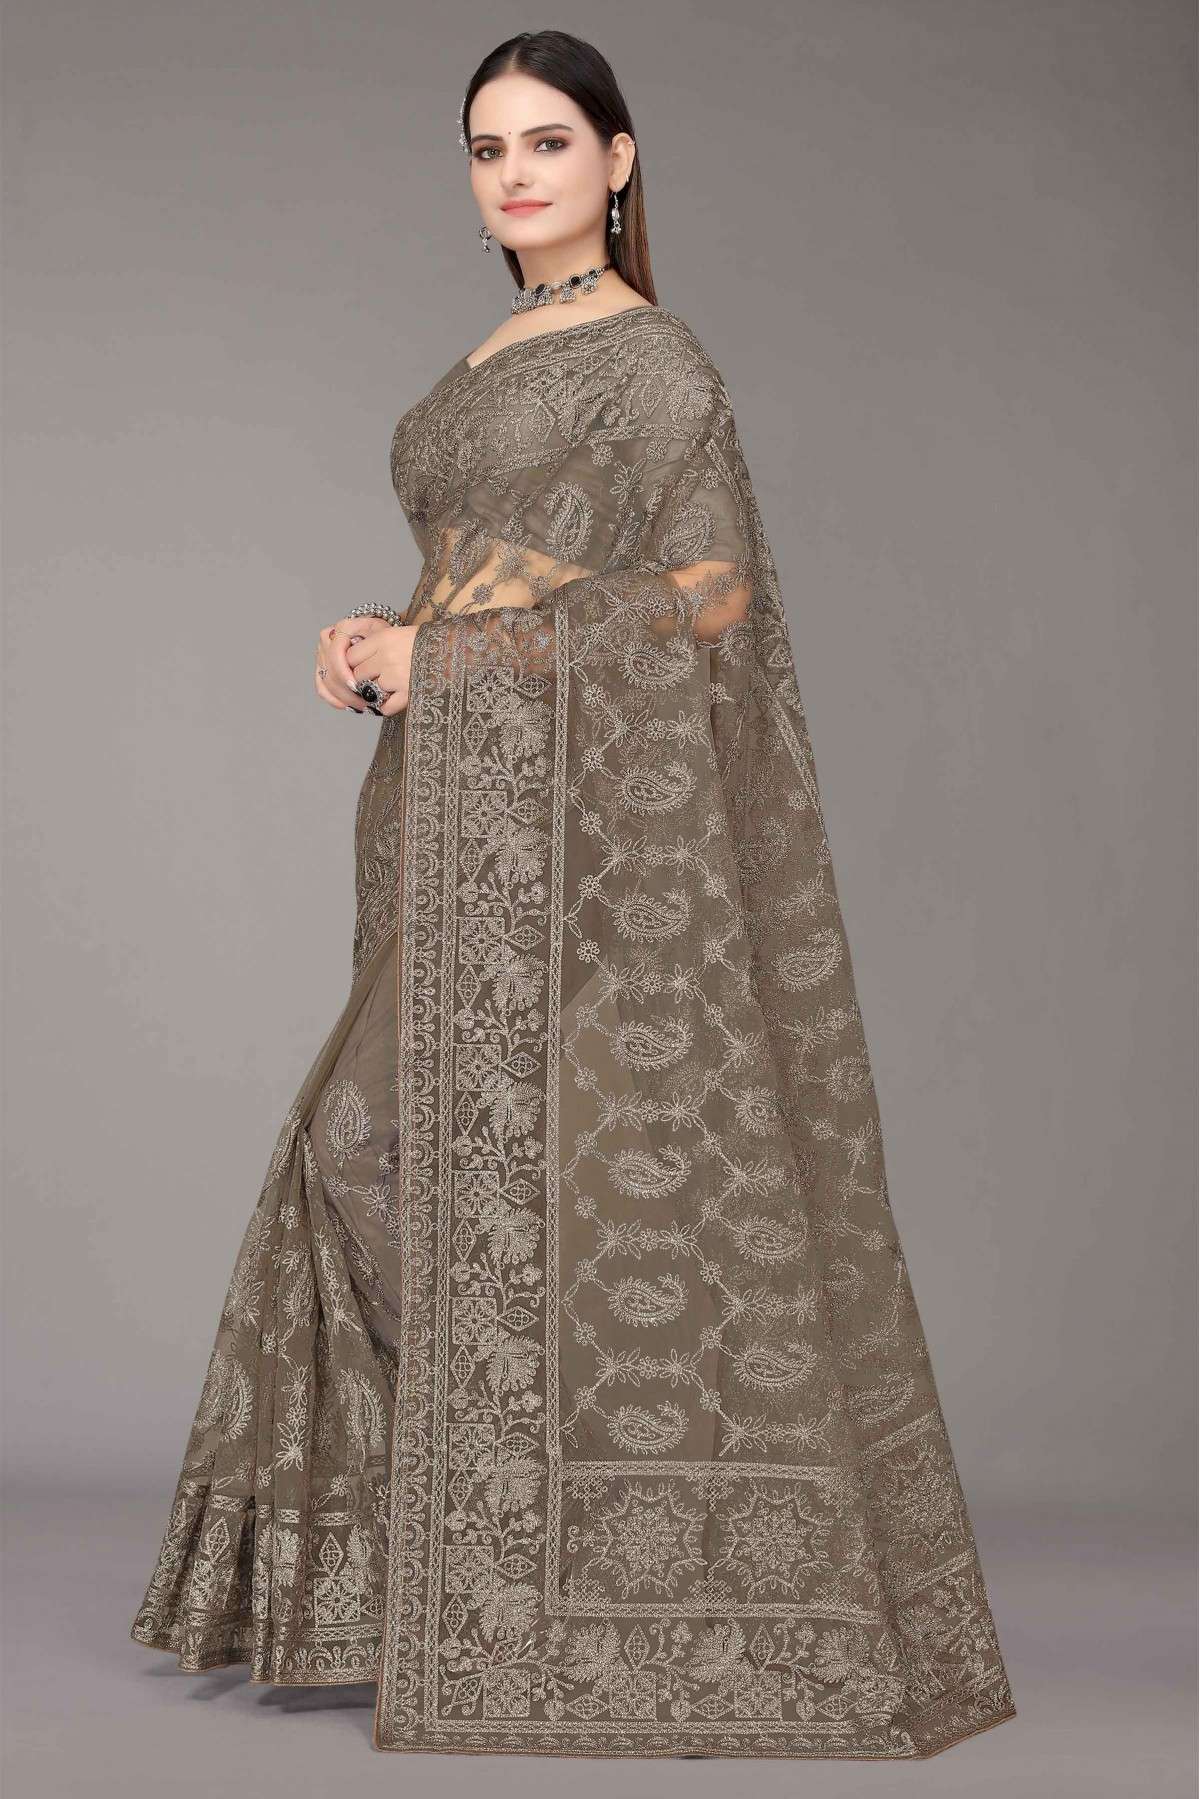 Net Embroidery Saree In Olive Green Colour - SR5416222